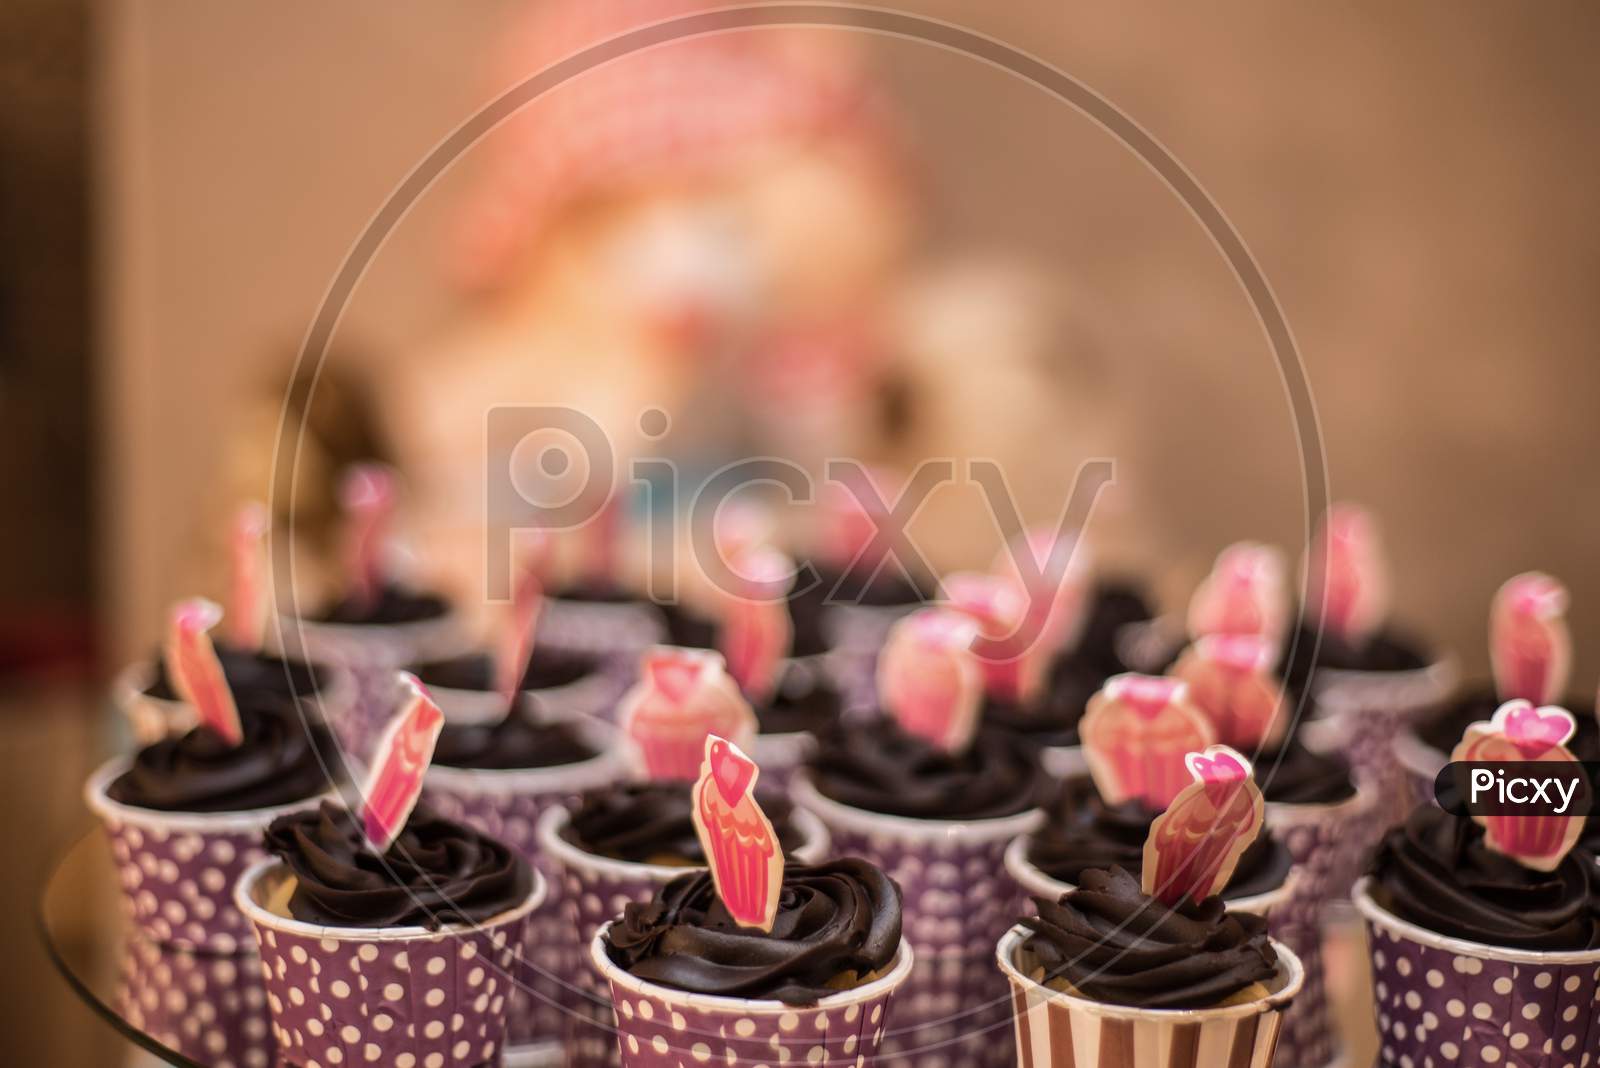 Cup cakes given in a birthday event with blur teddy in the background